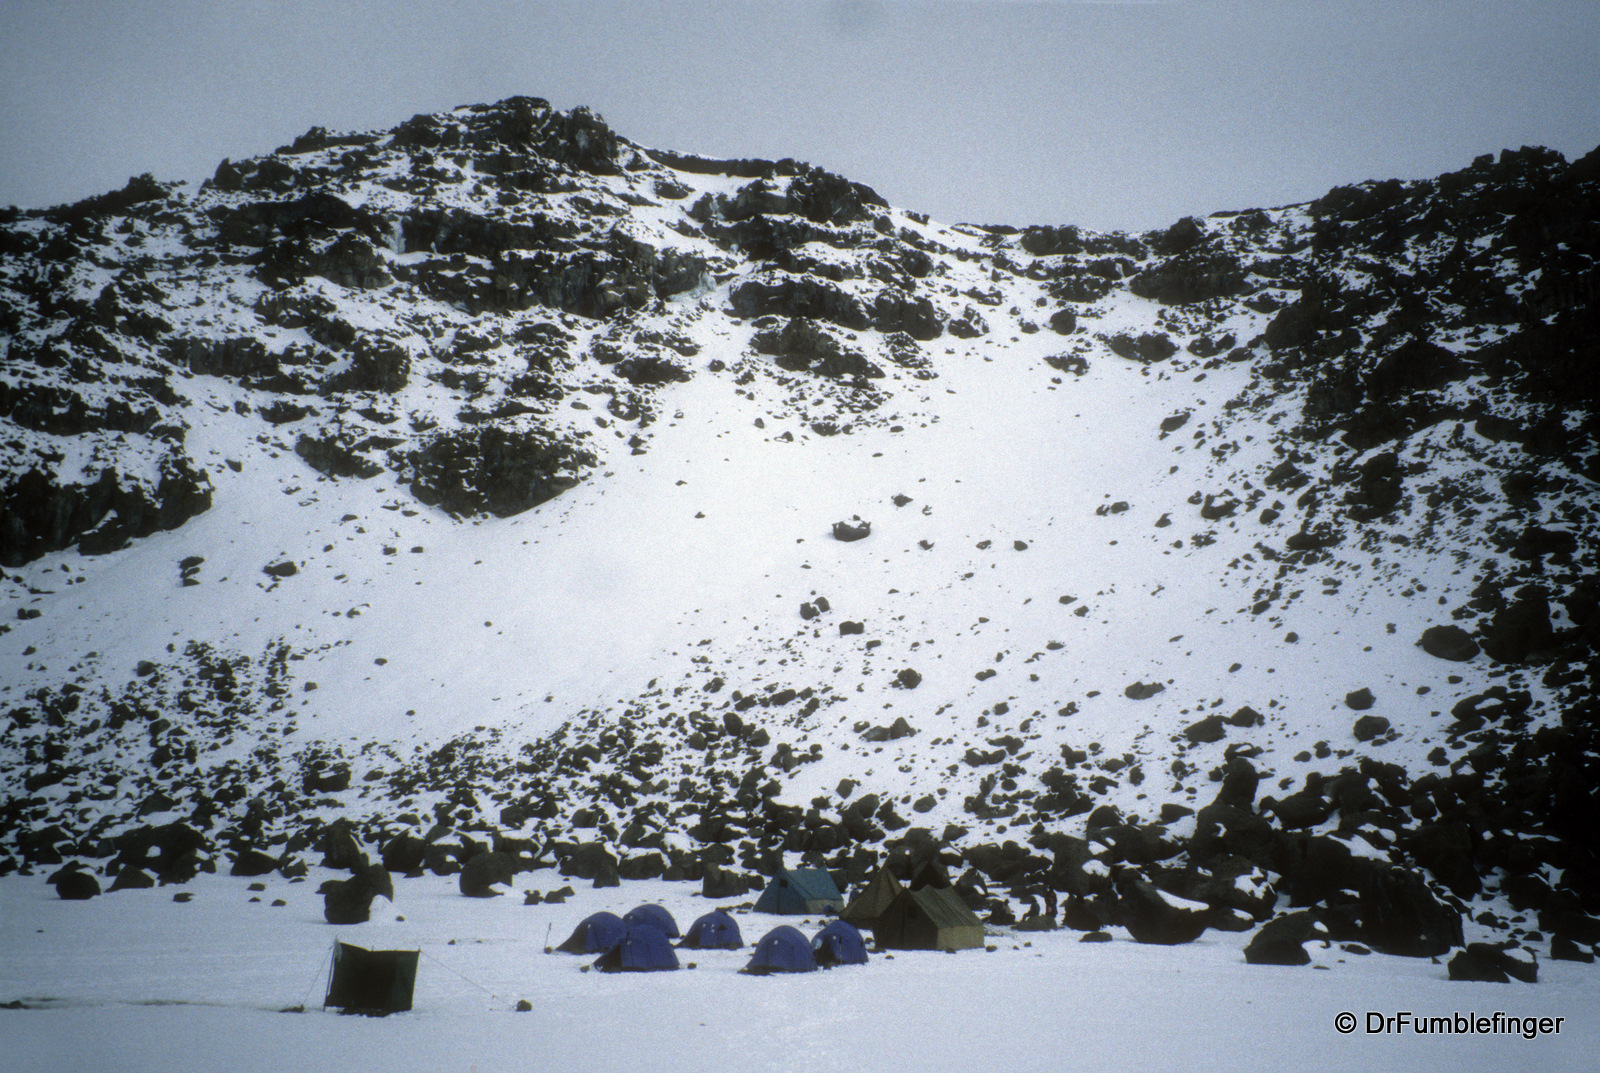 Camp at Western Icefields